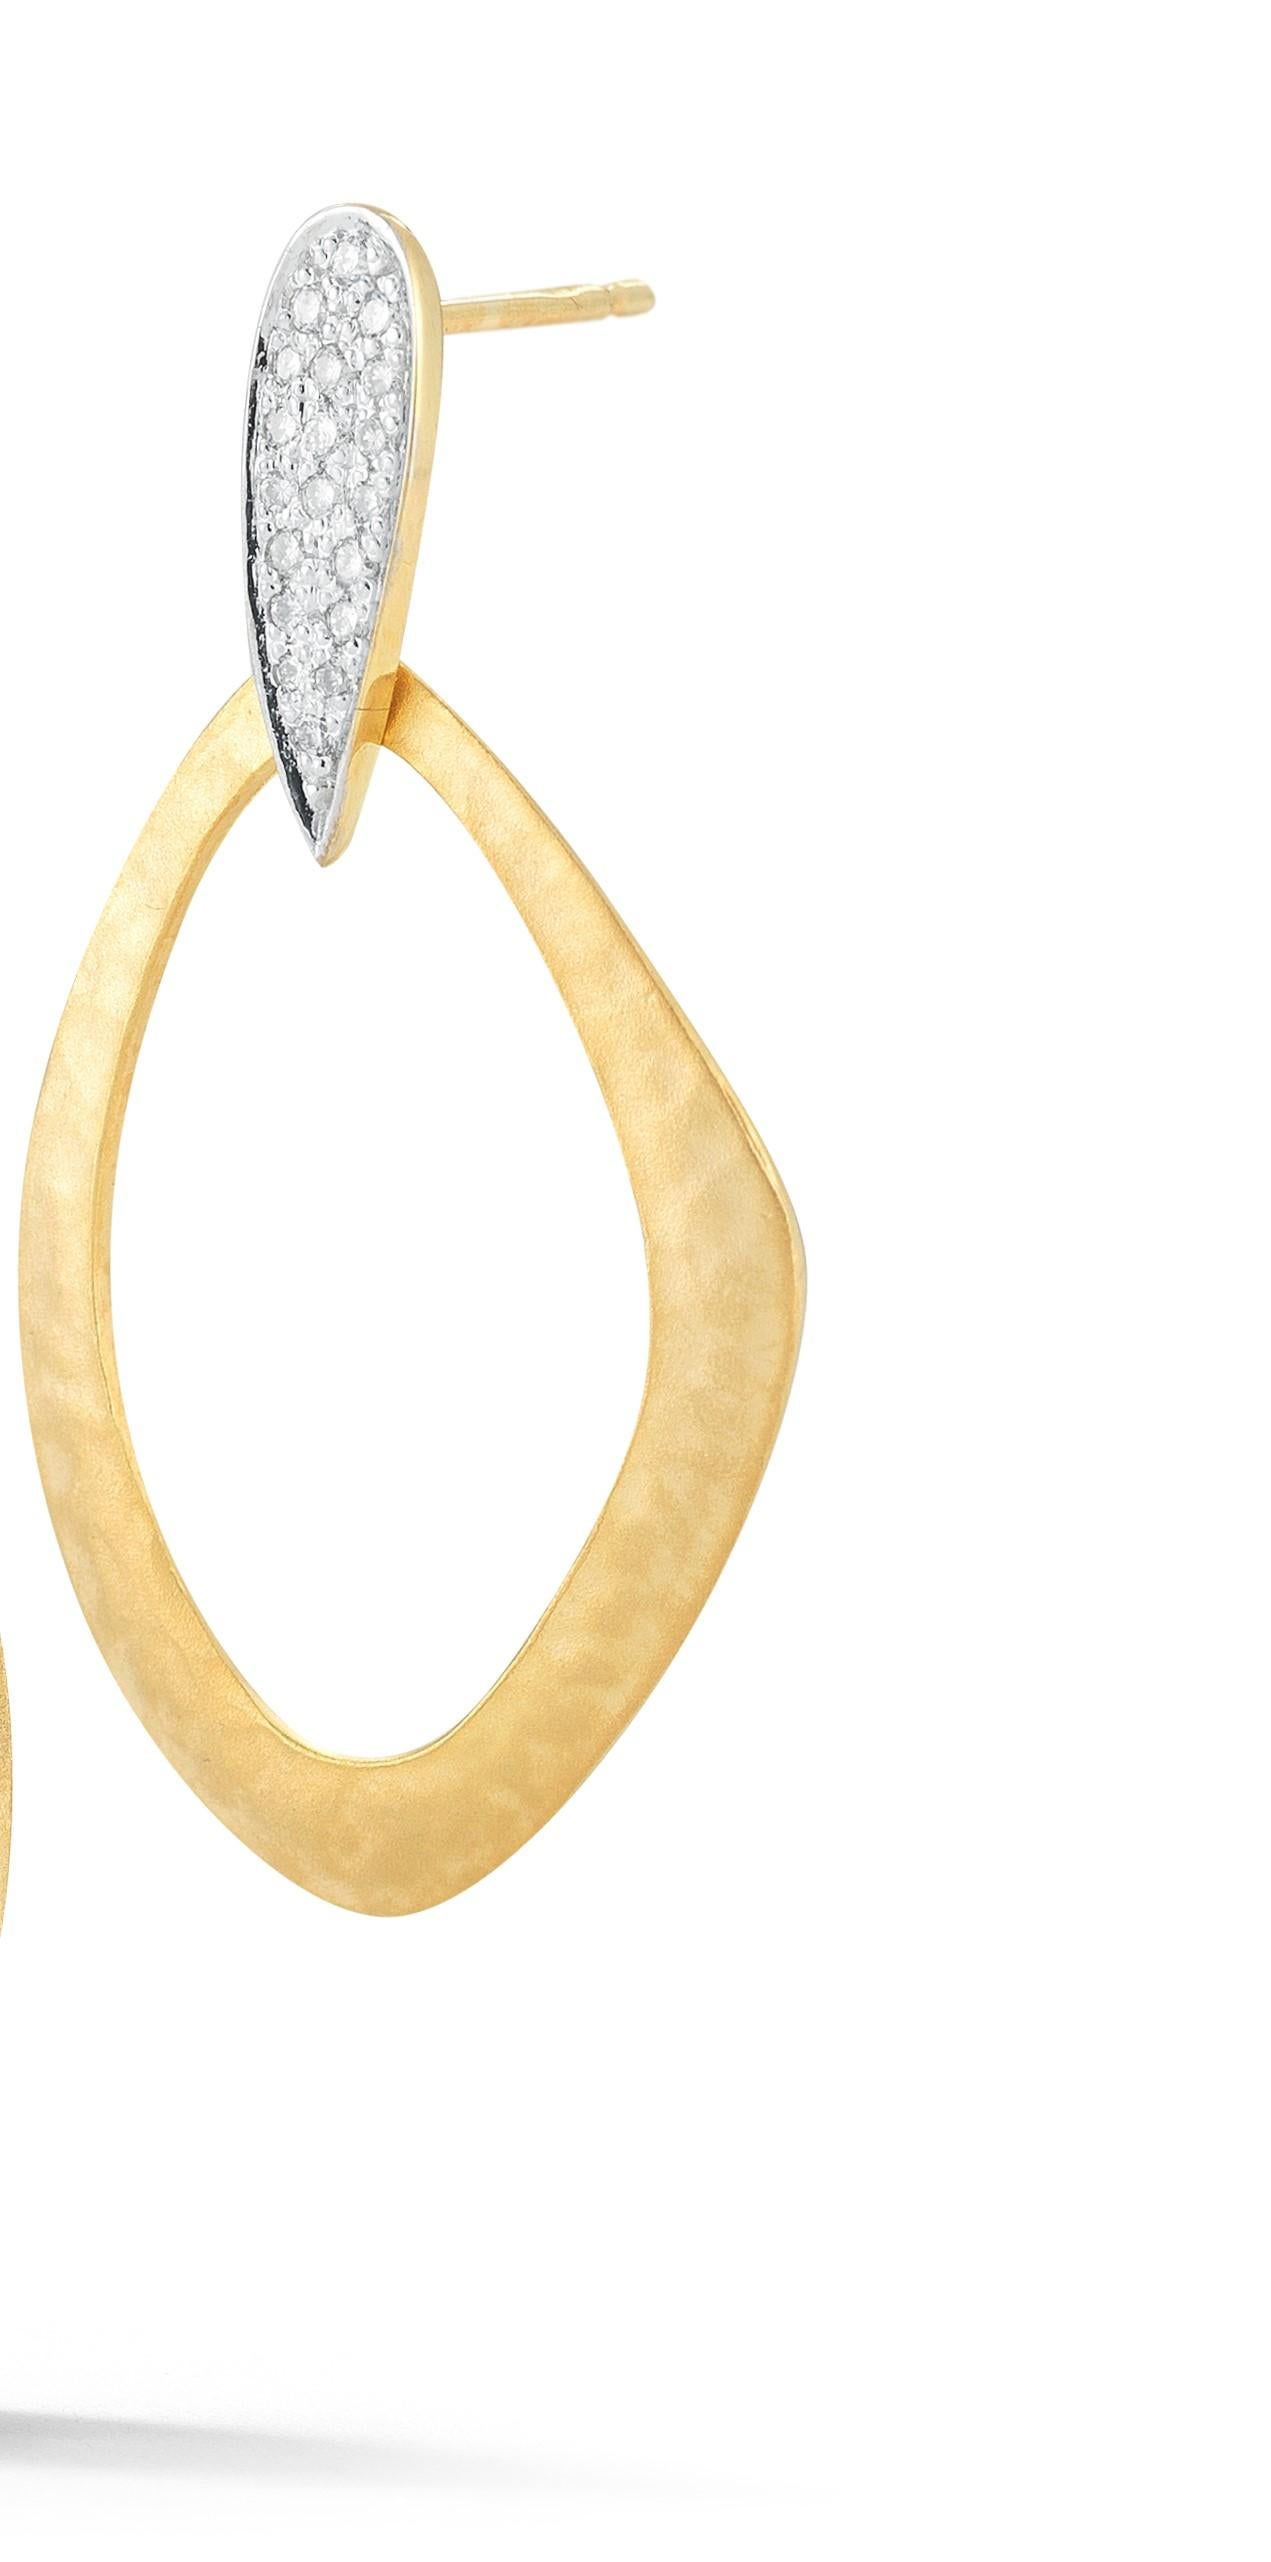 14 Karat Yellow Gold Hand-Crafted Matte and Hammer-Finished Open-Form Dangling Earrings, Accented with 0.30 Carats of Pave Set Diamonds.
